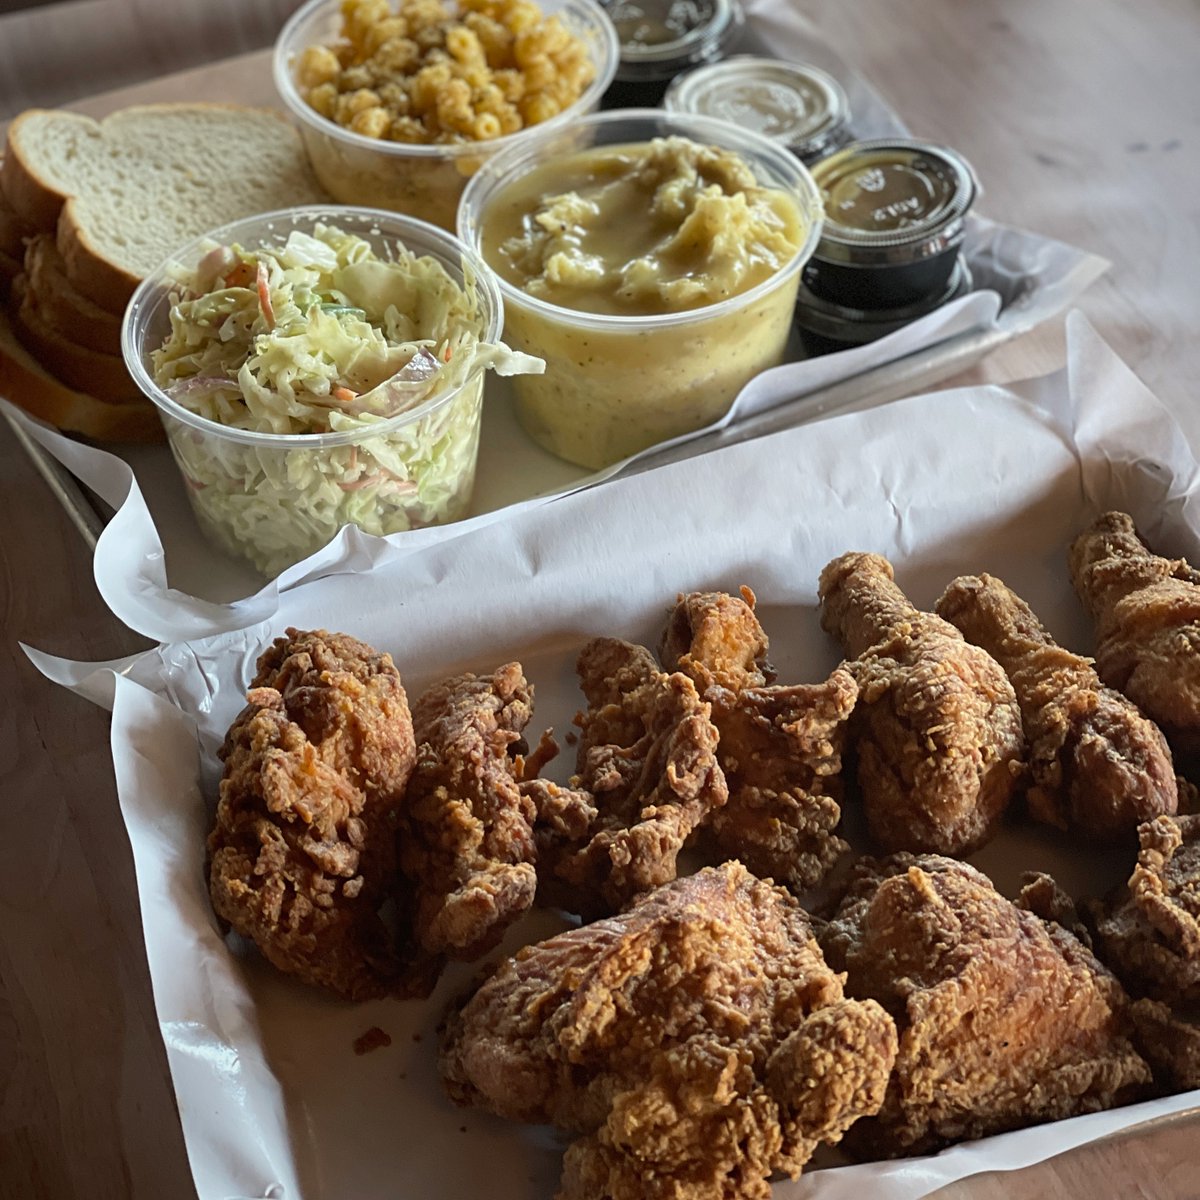 The holiday rush is on! 🎄🎅🎁 Skip the cookin' and grab a Southern Family Meal Deal today! 🐓🔥❤️ #chickendinner #stlsouthern #friedchicken #nashvillehotchicken #stleats #eatlocal #stlfoodie #explorestlouis #stlcatering #catering